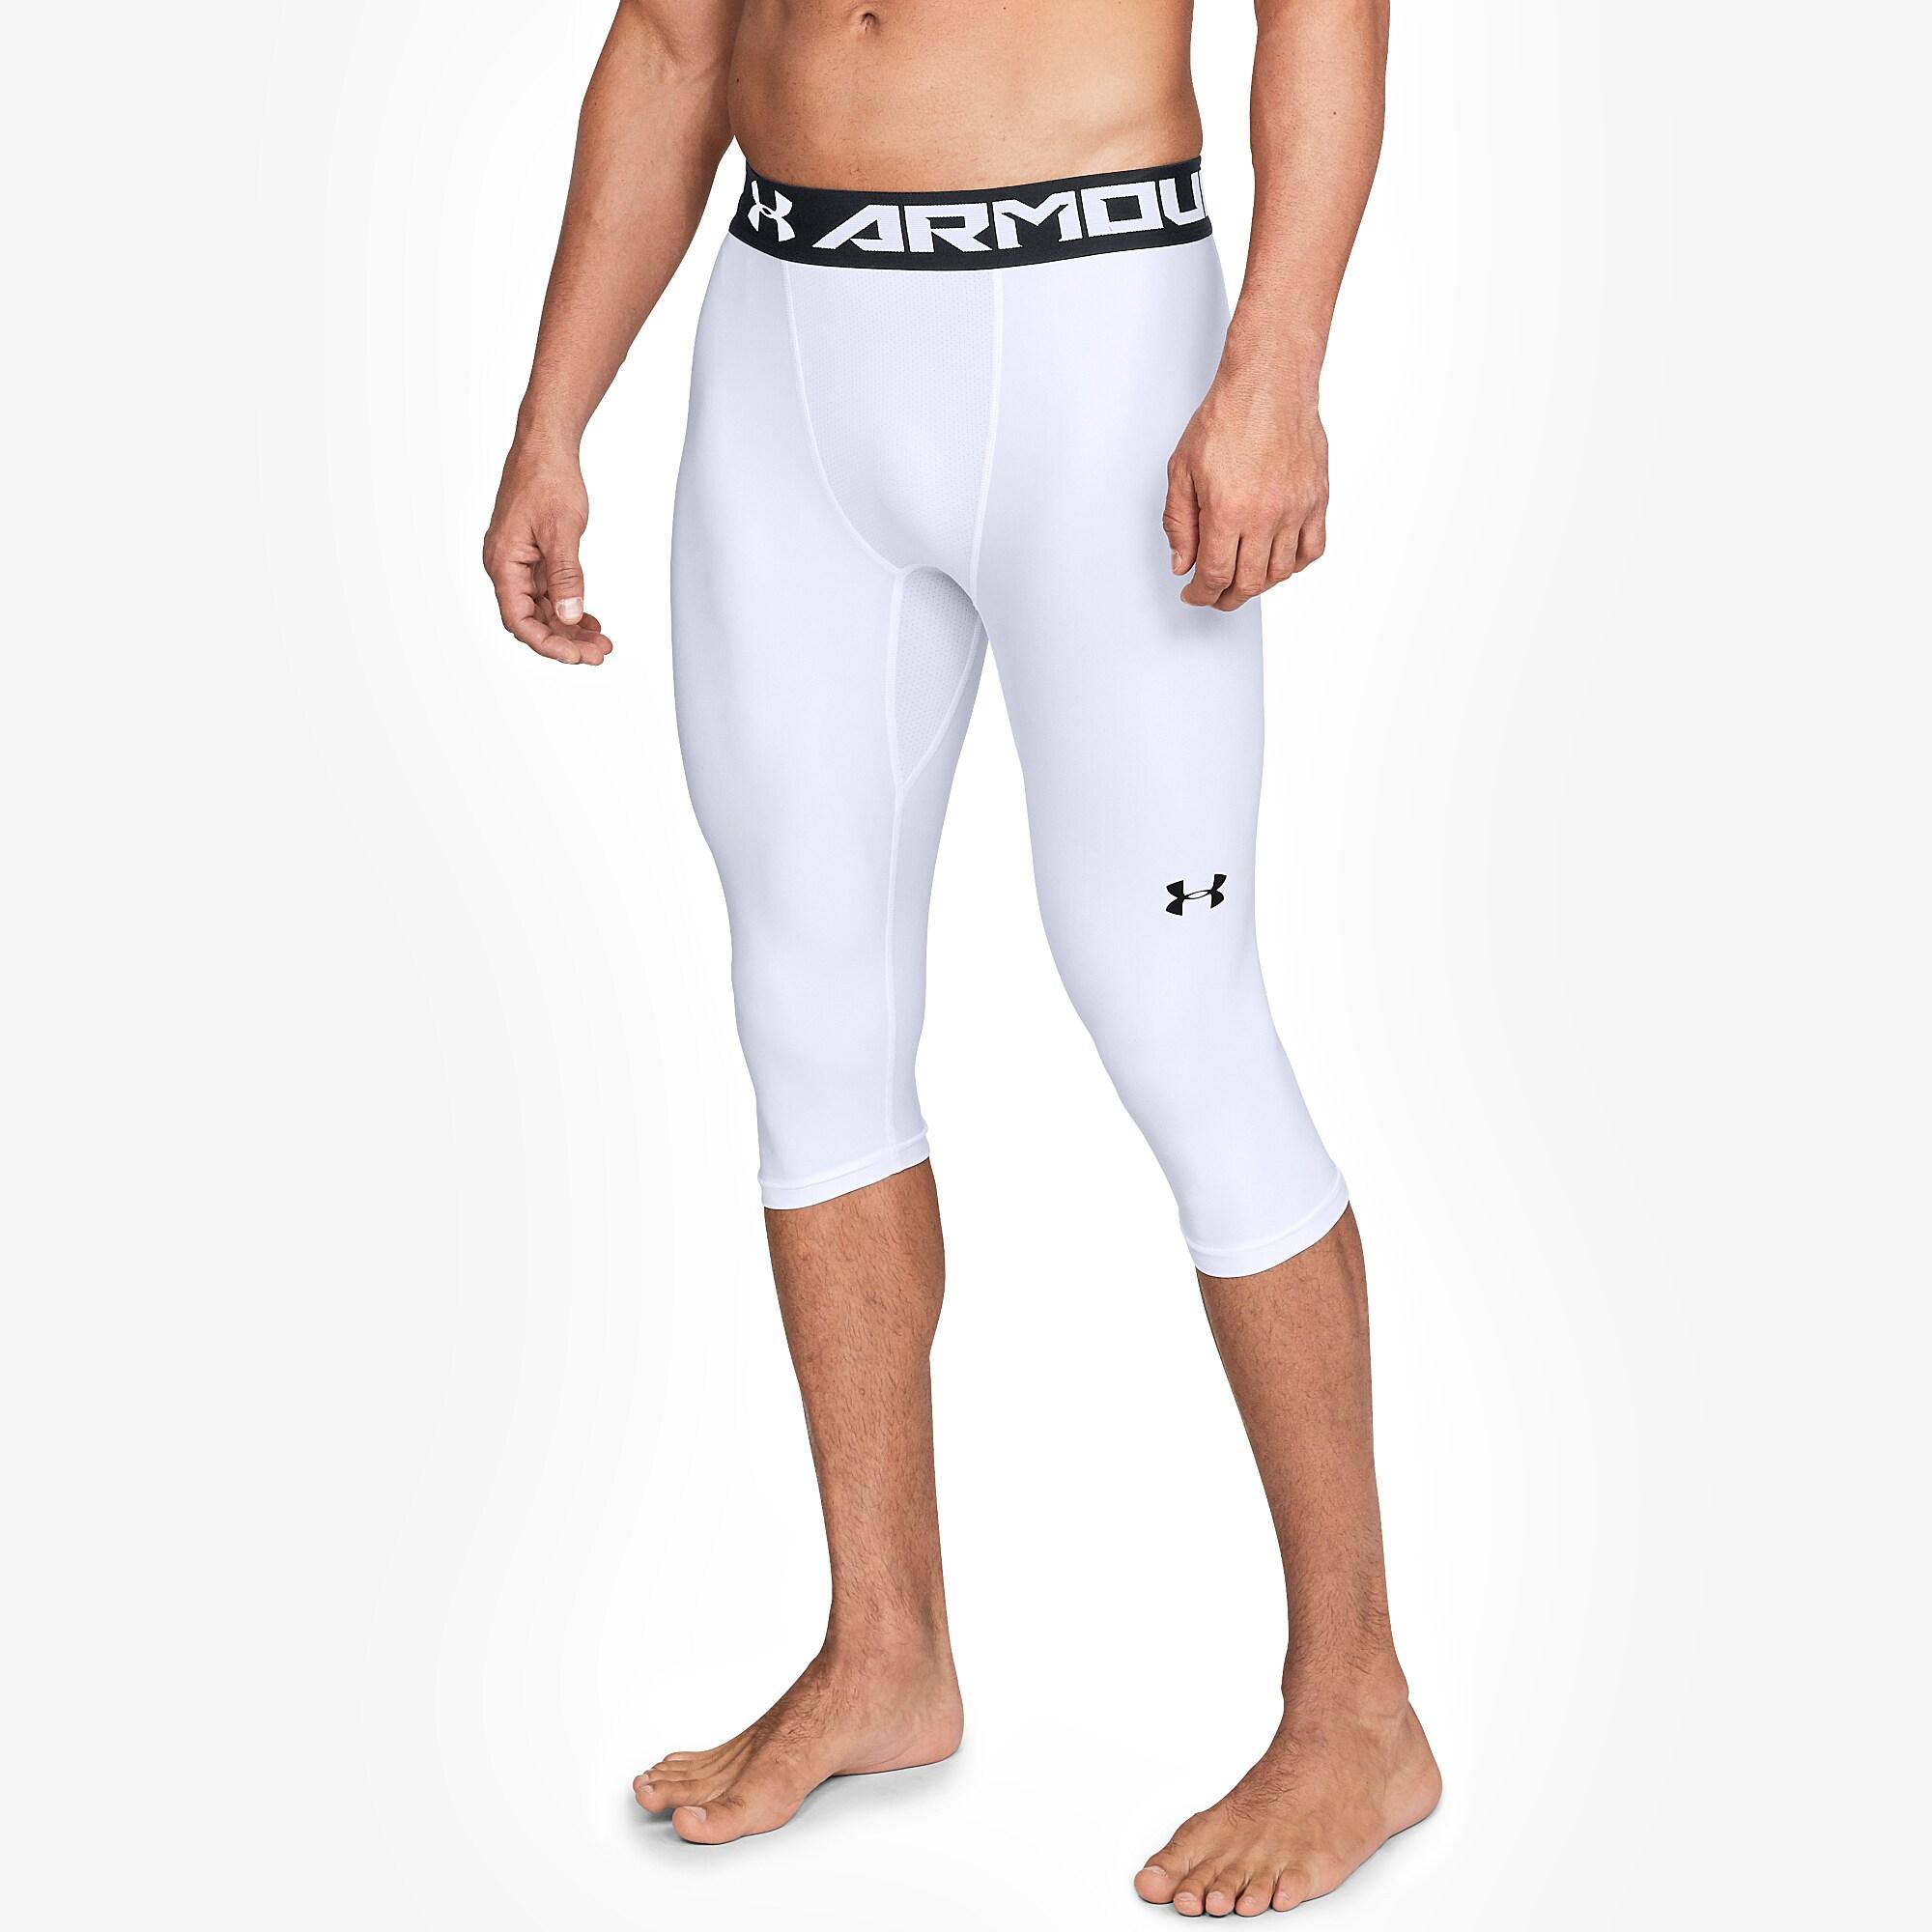 Under Armour Baseline Knee Tights in 